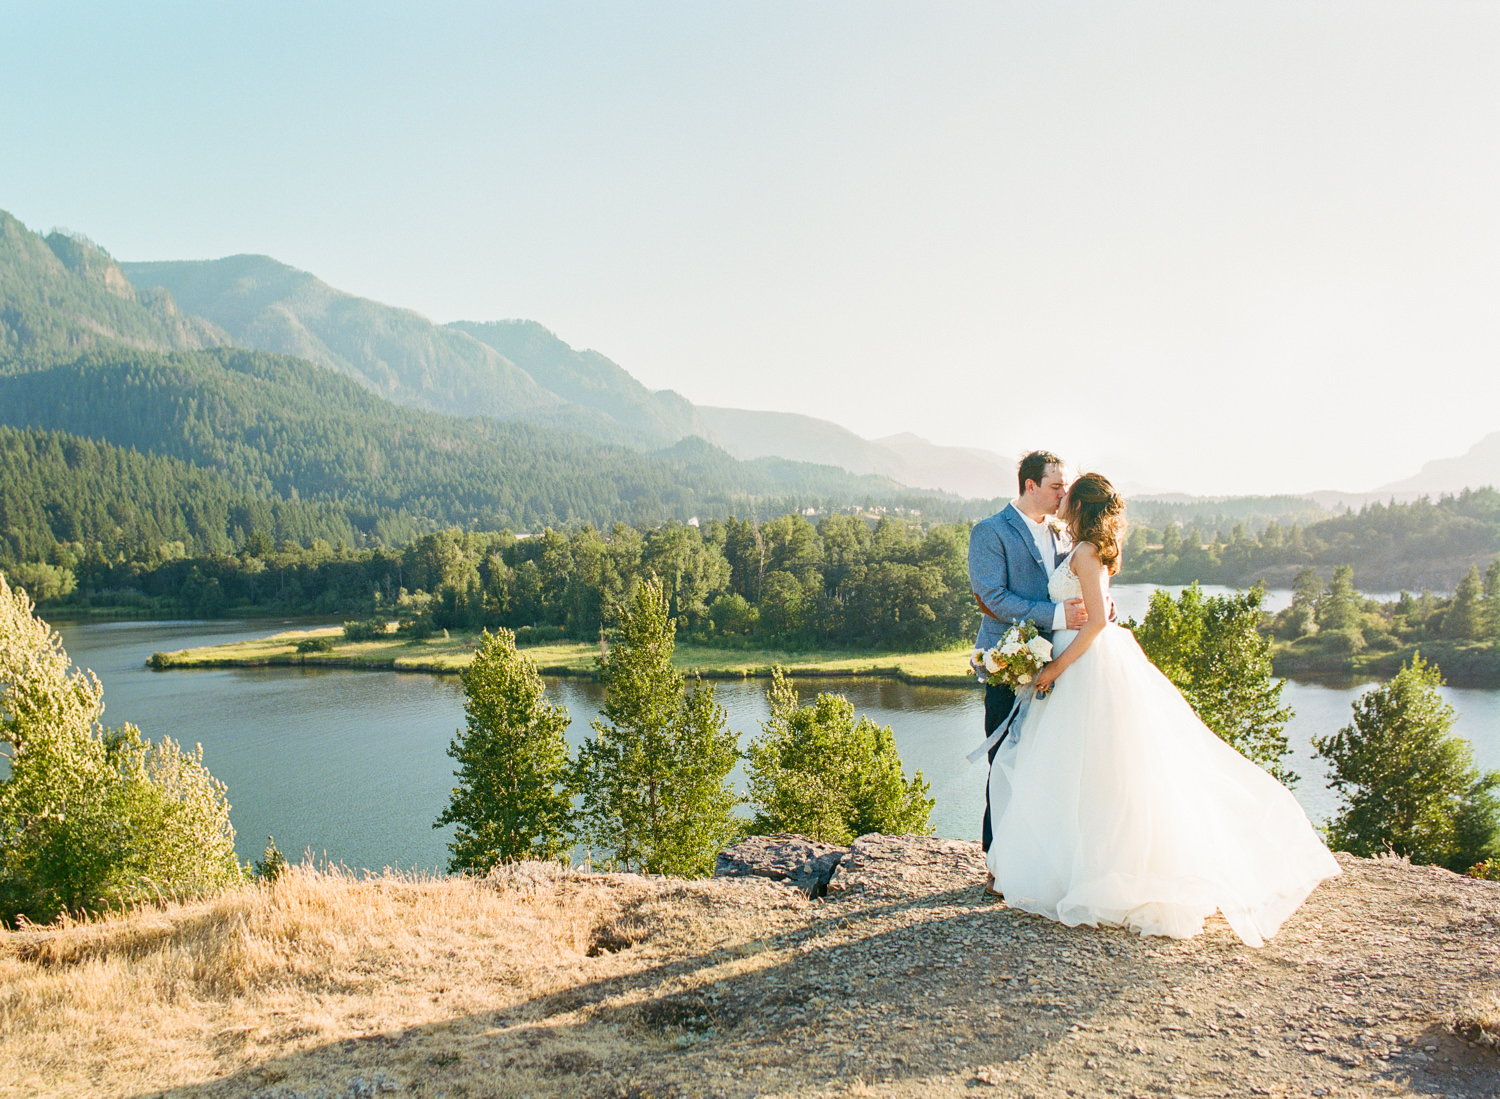 Oregon elopement wedding photography at the Columbia River Gorge; Erica Robnett Photography